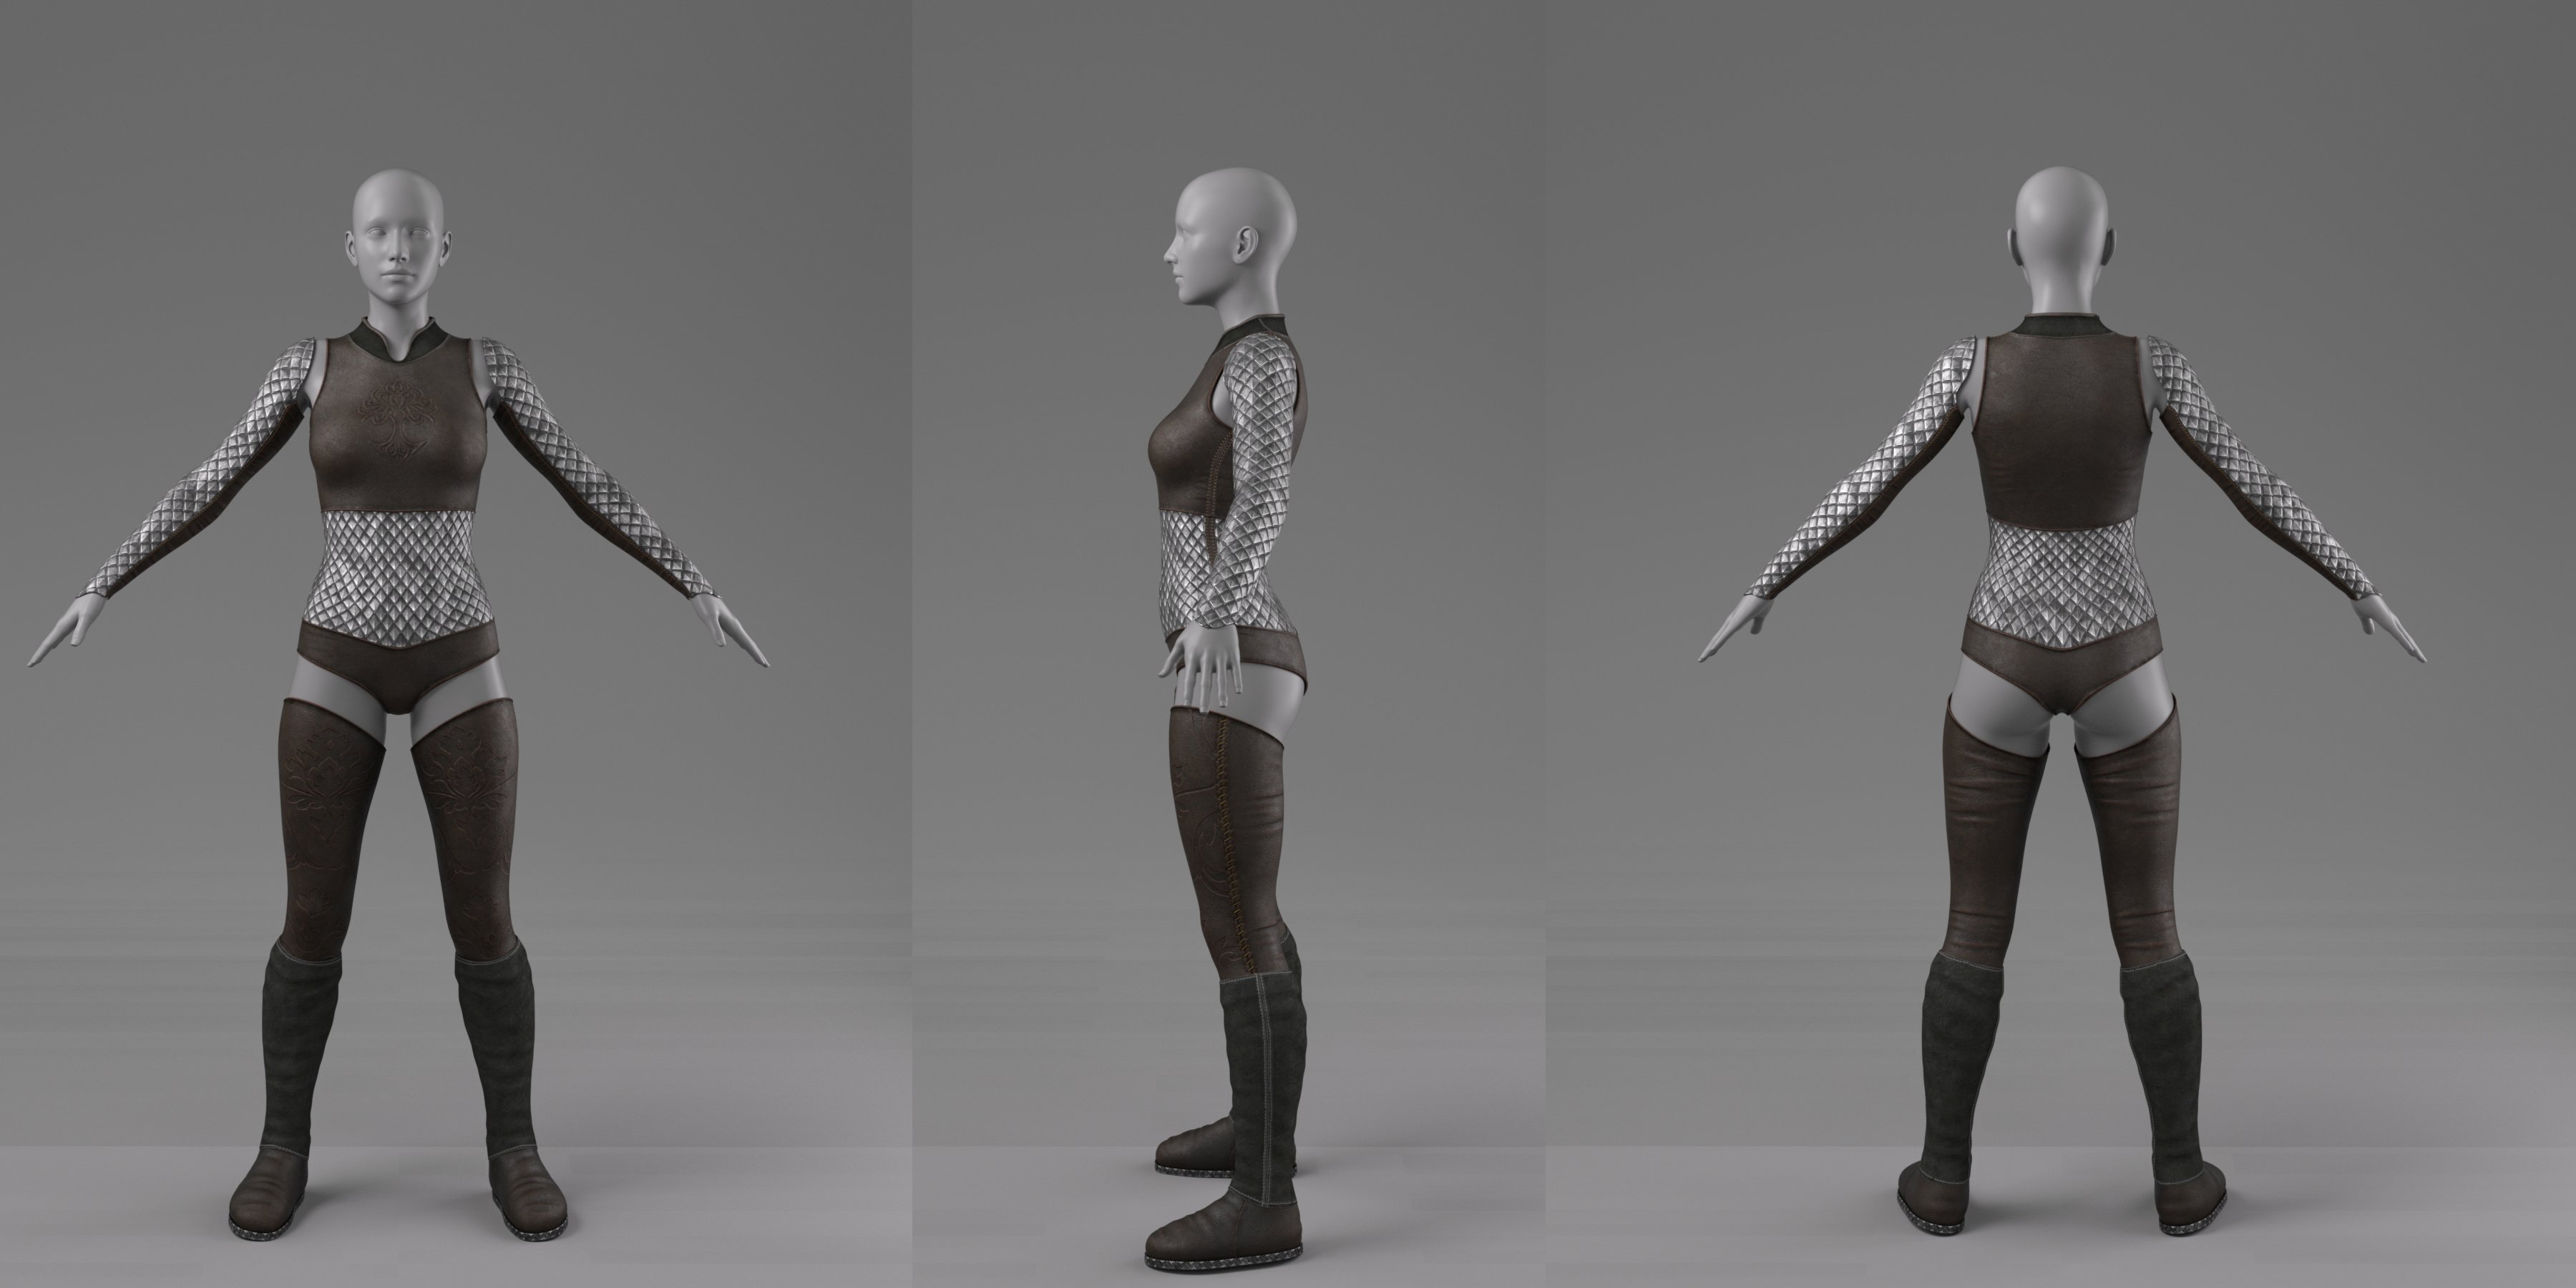 dForce Valiant Armor for Genesis 8 and 8.1 Females by: Cichy3D, 3D Models by Daz 3D